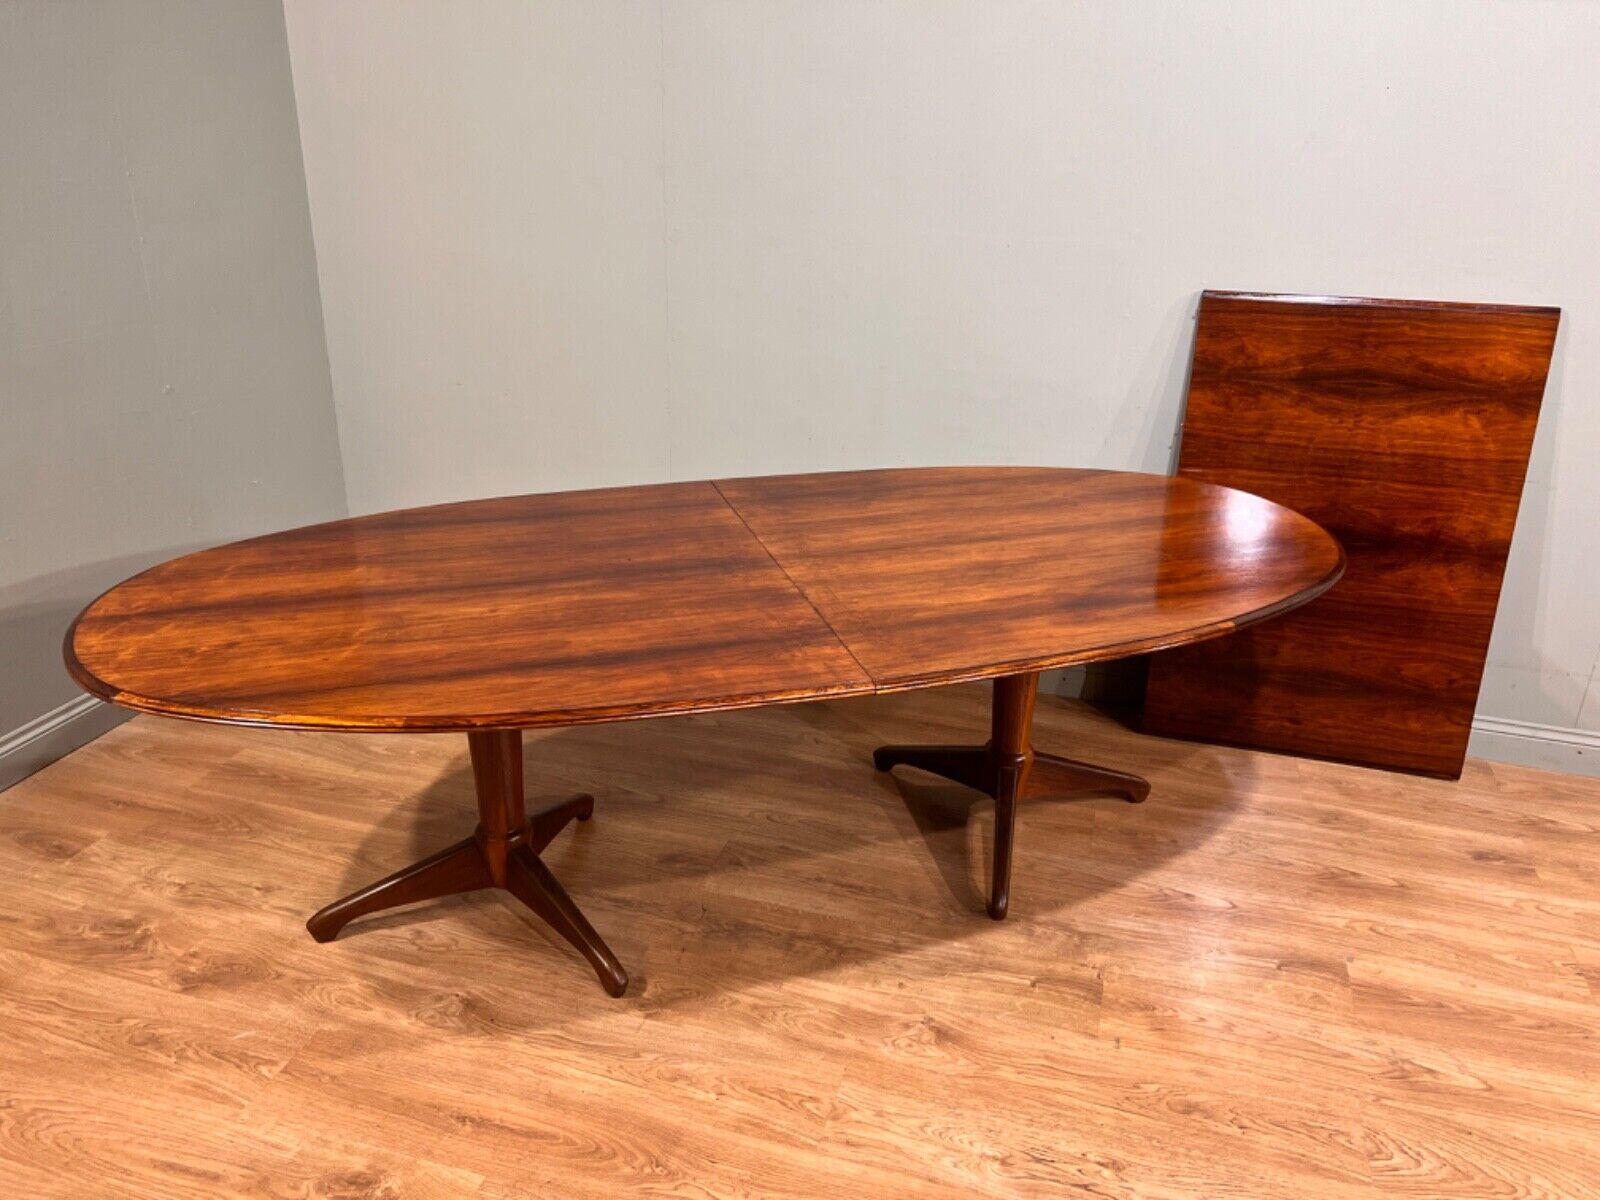 Cool Mid Century Danish style extending dining table by McIntosh
Circa 1960s on this on trend piece of vintage furntiure
Great patina to the wood which features oval ends
Table extends via a leaf system great for larger gatherings like a dinner